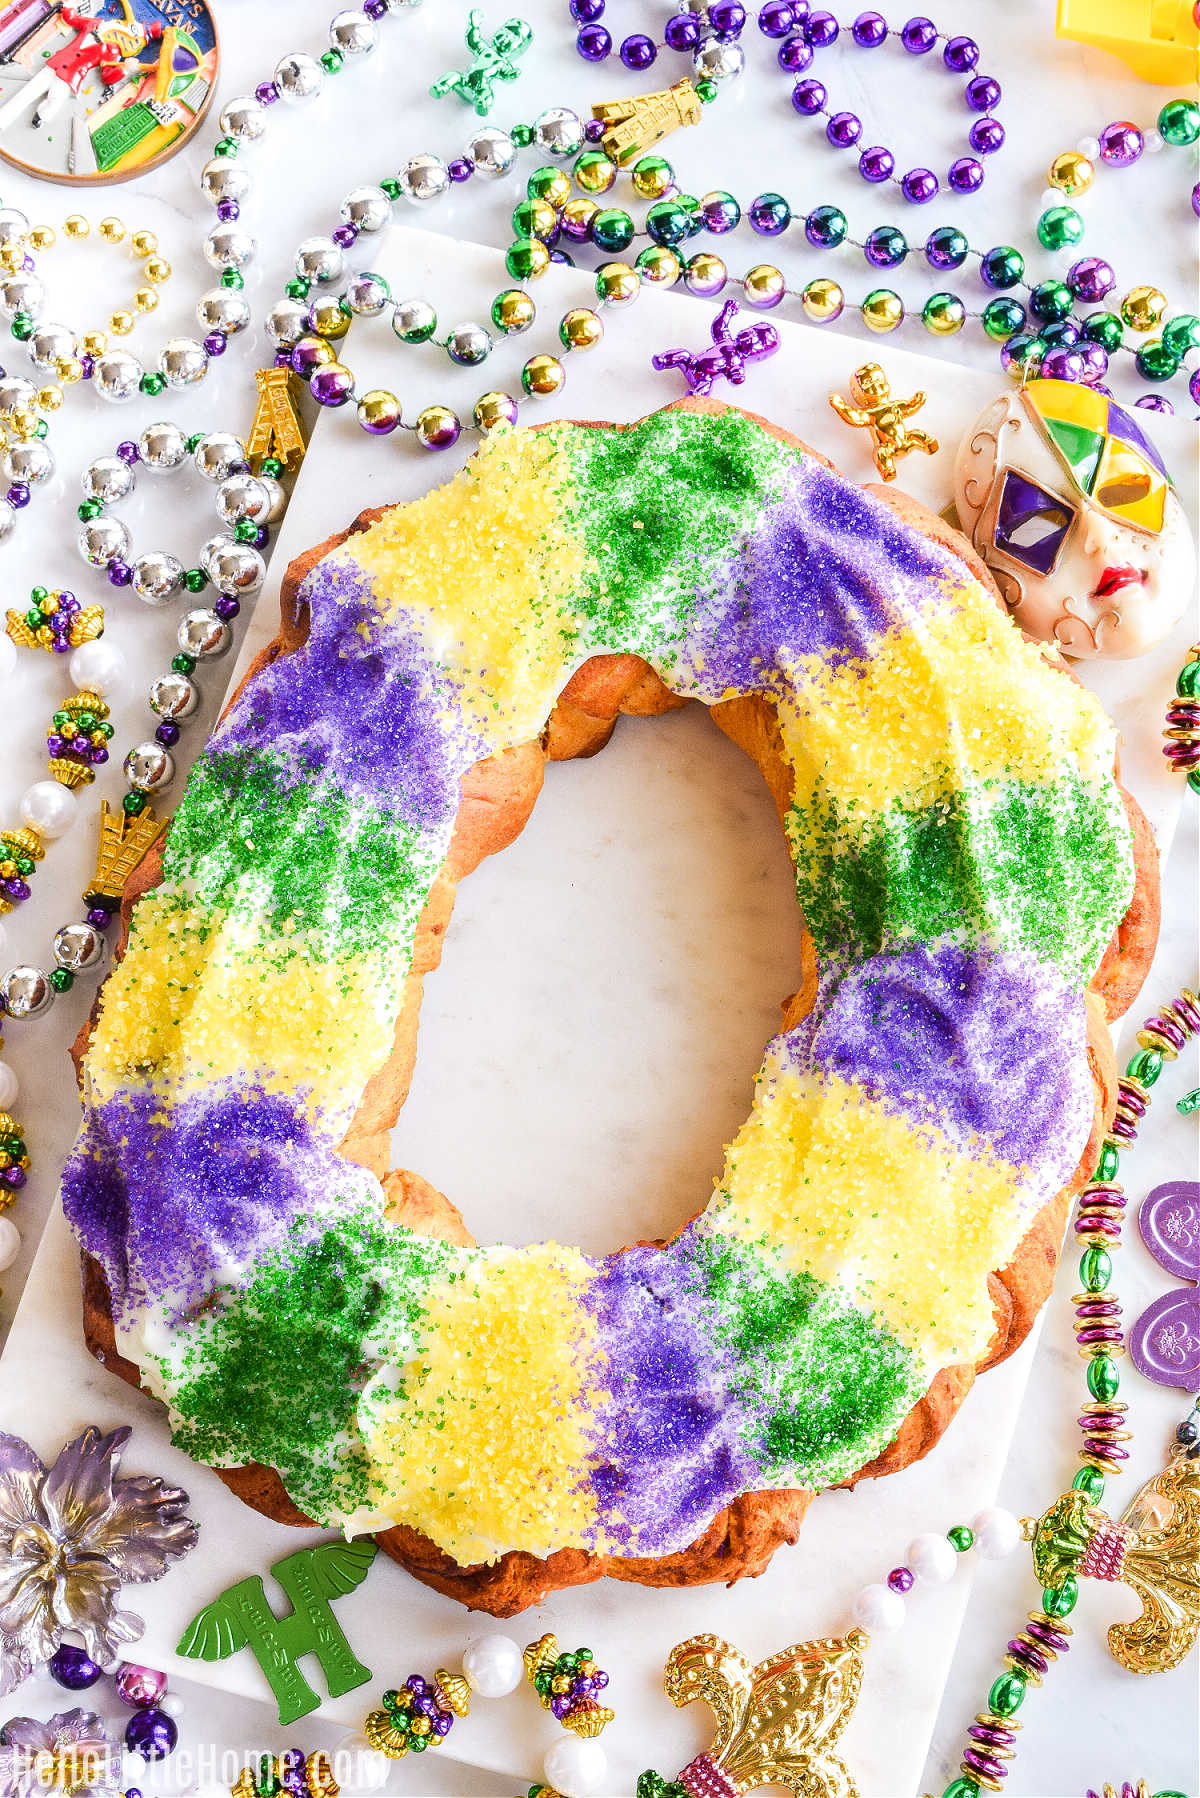 The finished Mardi Gras cake served on a tray surrounded by beads.